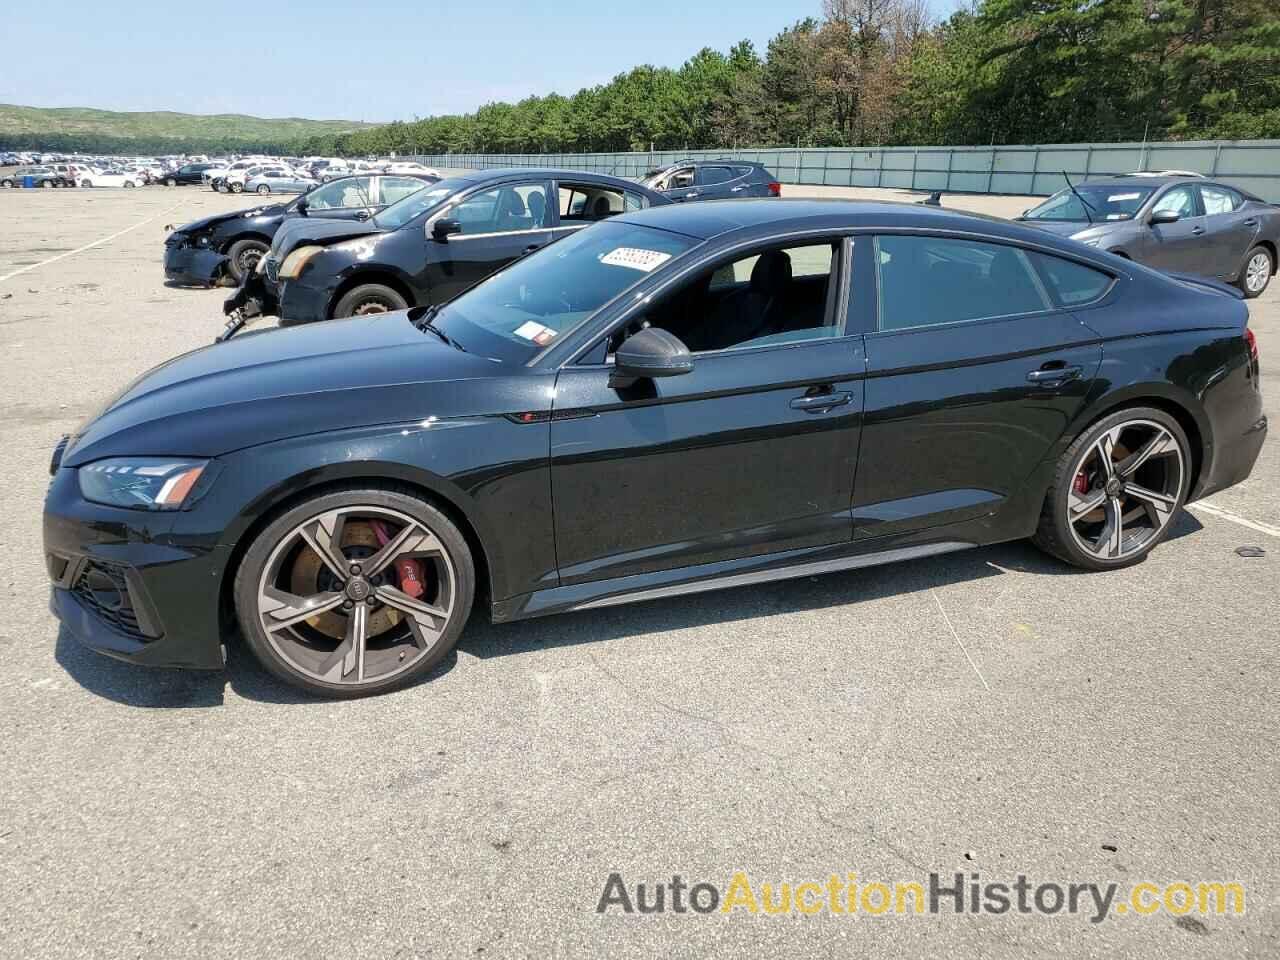 AUDI S5/RS5, WUAAWCF54PA900981